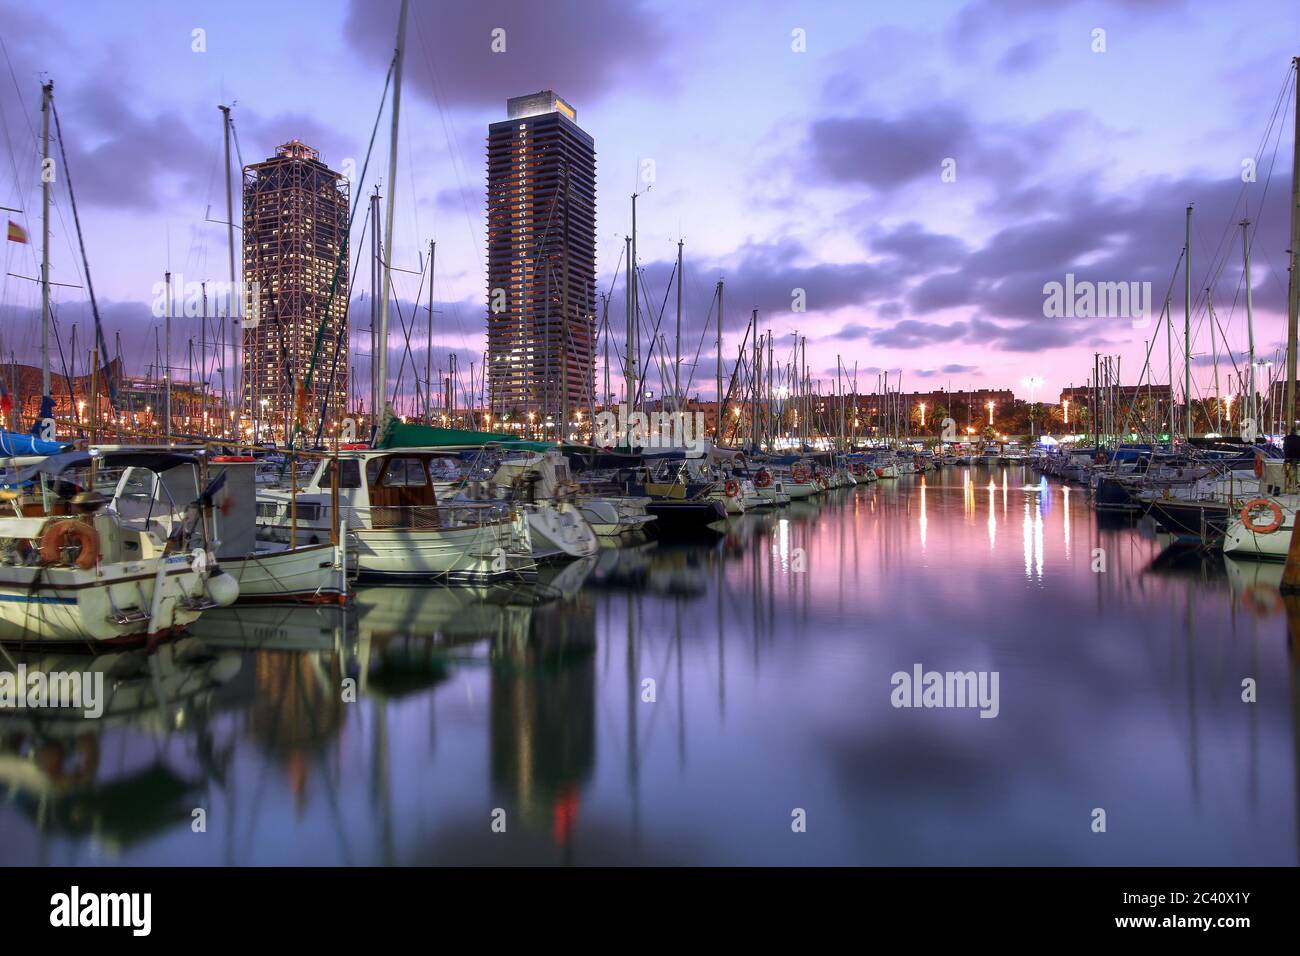 Twin skyscrapers towering over the marina in Port Olimpic (Olympic Harbor), Barcelona, Spain at sunset. Stock Photo